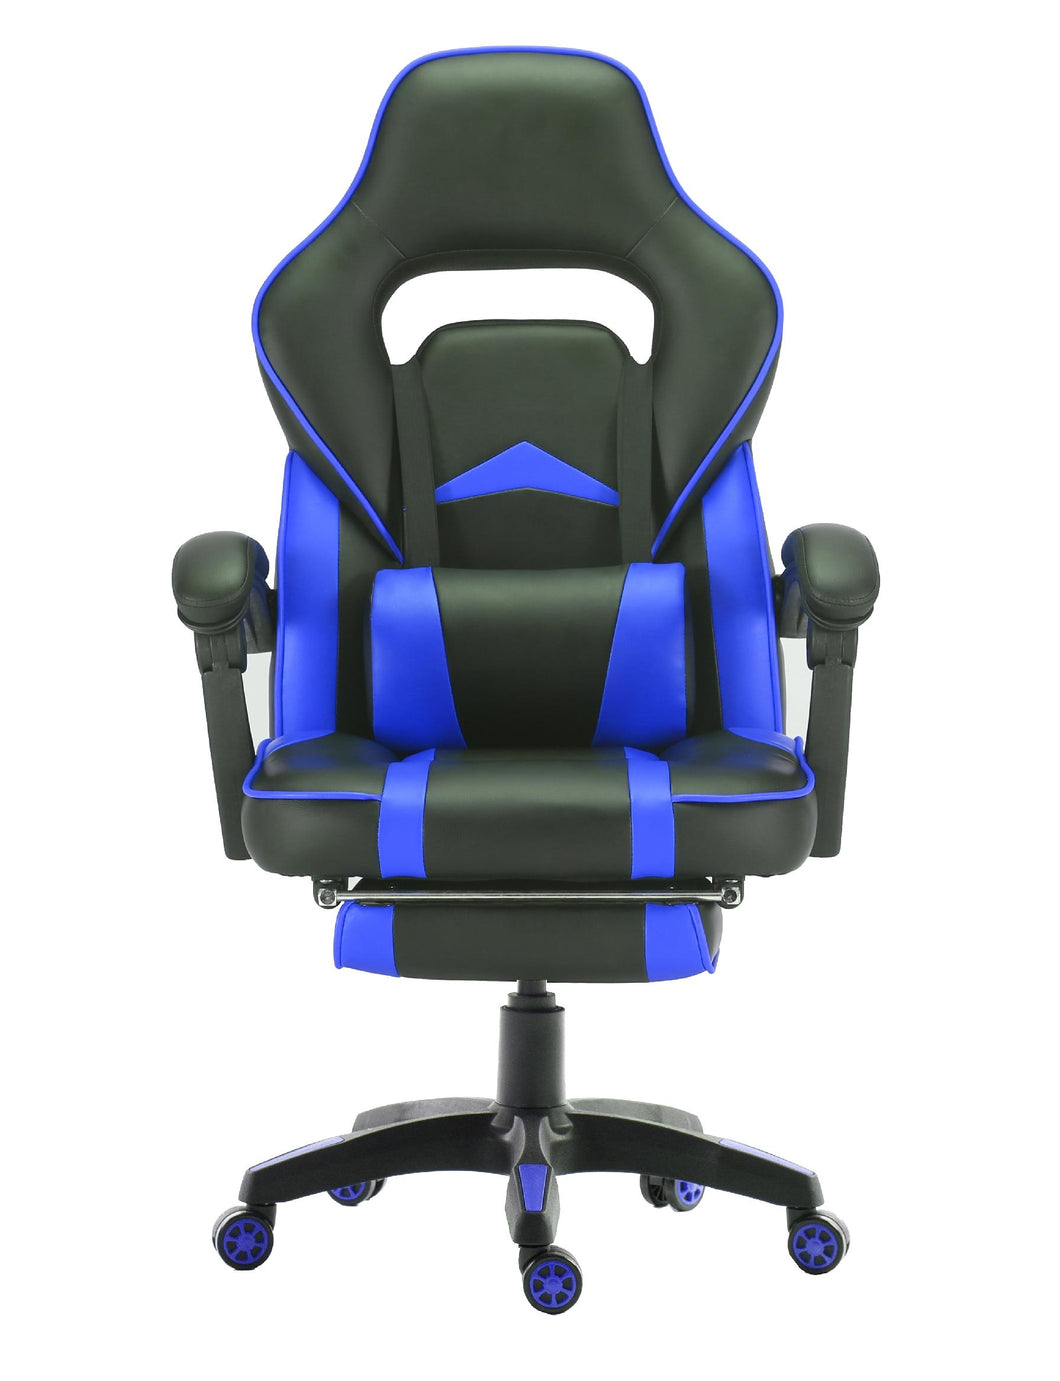 FOOTREST SERIES/ 055 GAMING CHAIR (BLACK & BLUE)